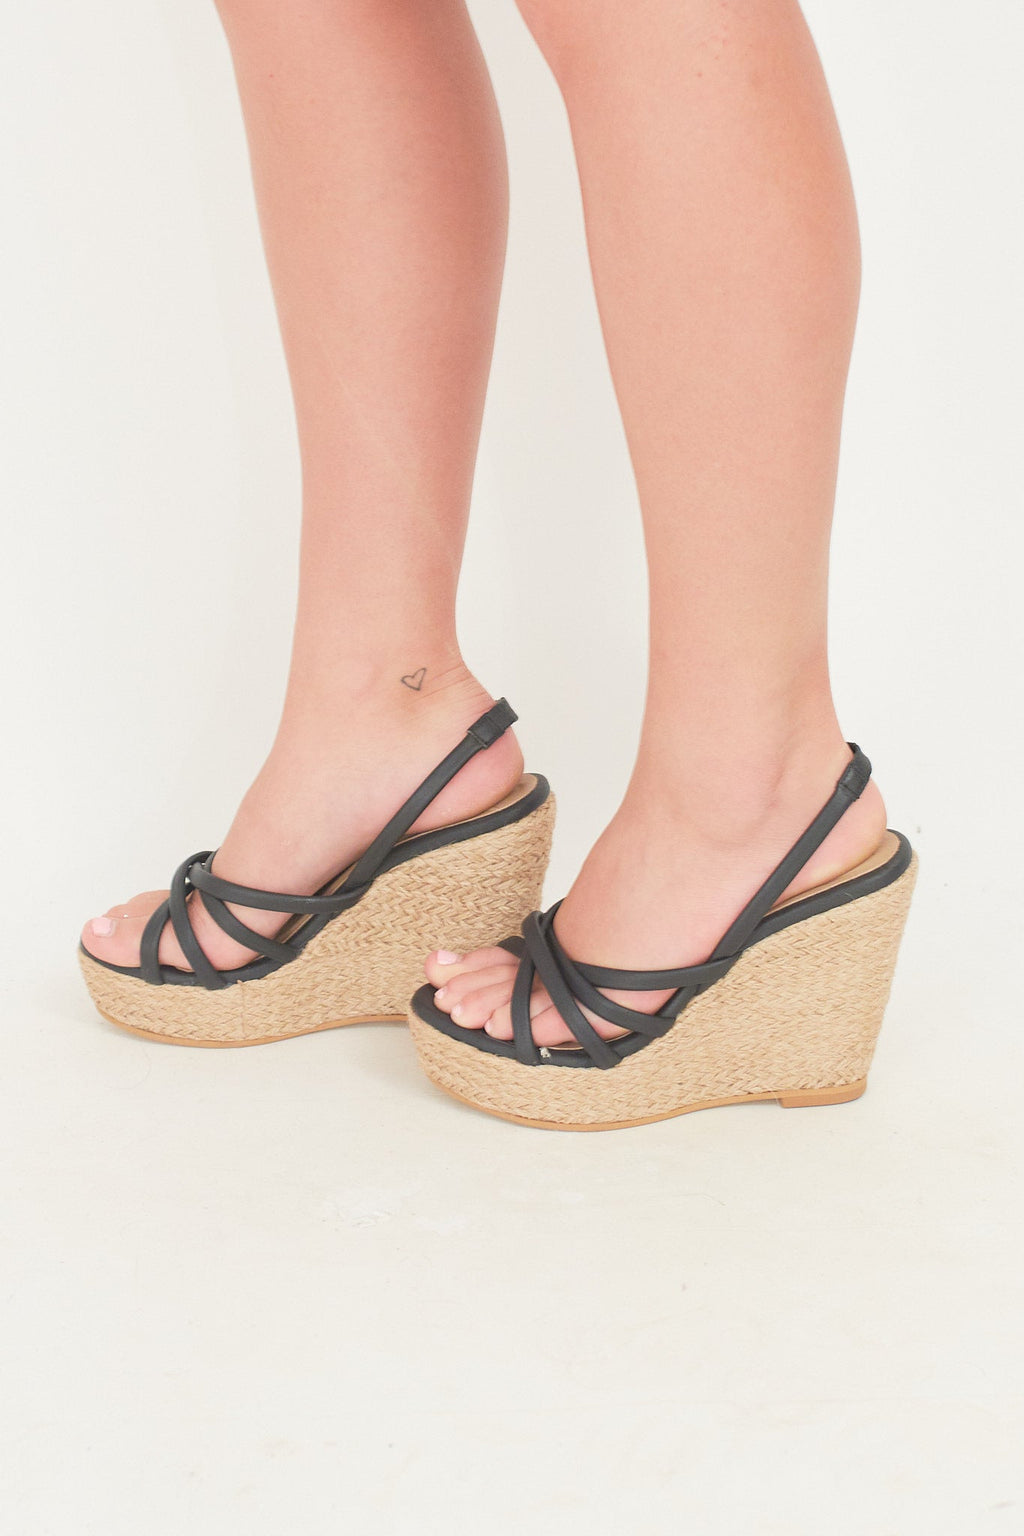 Margaritas Raffia Strappy Wedge - Driftwood Maui & Home By Driftwood